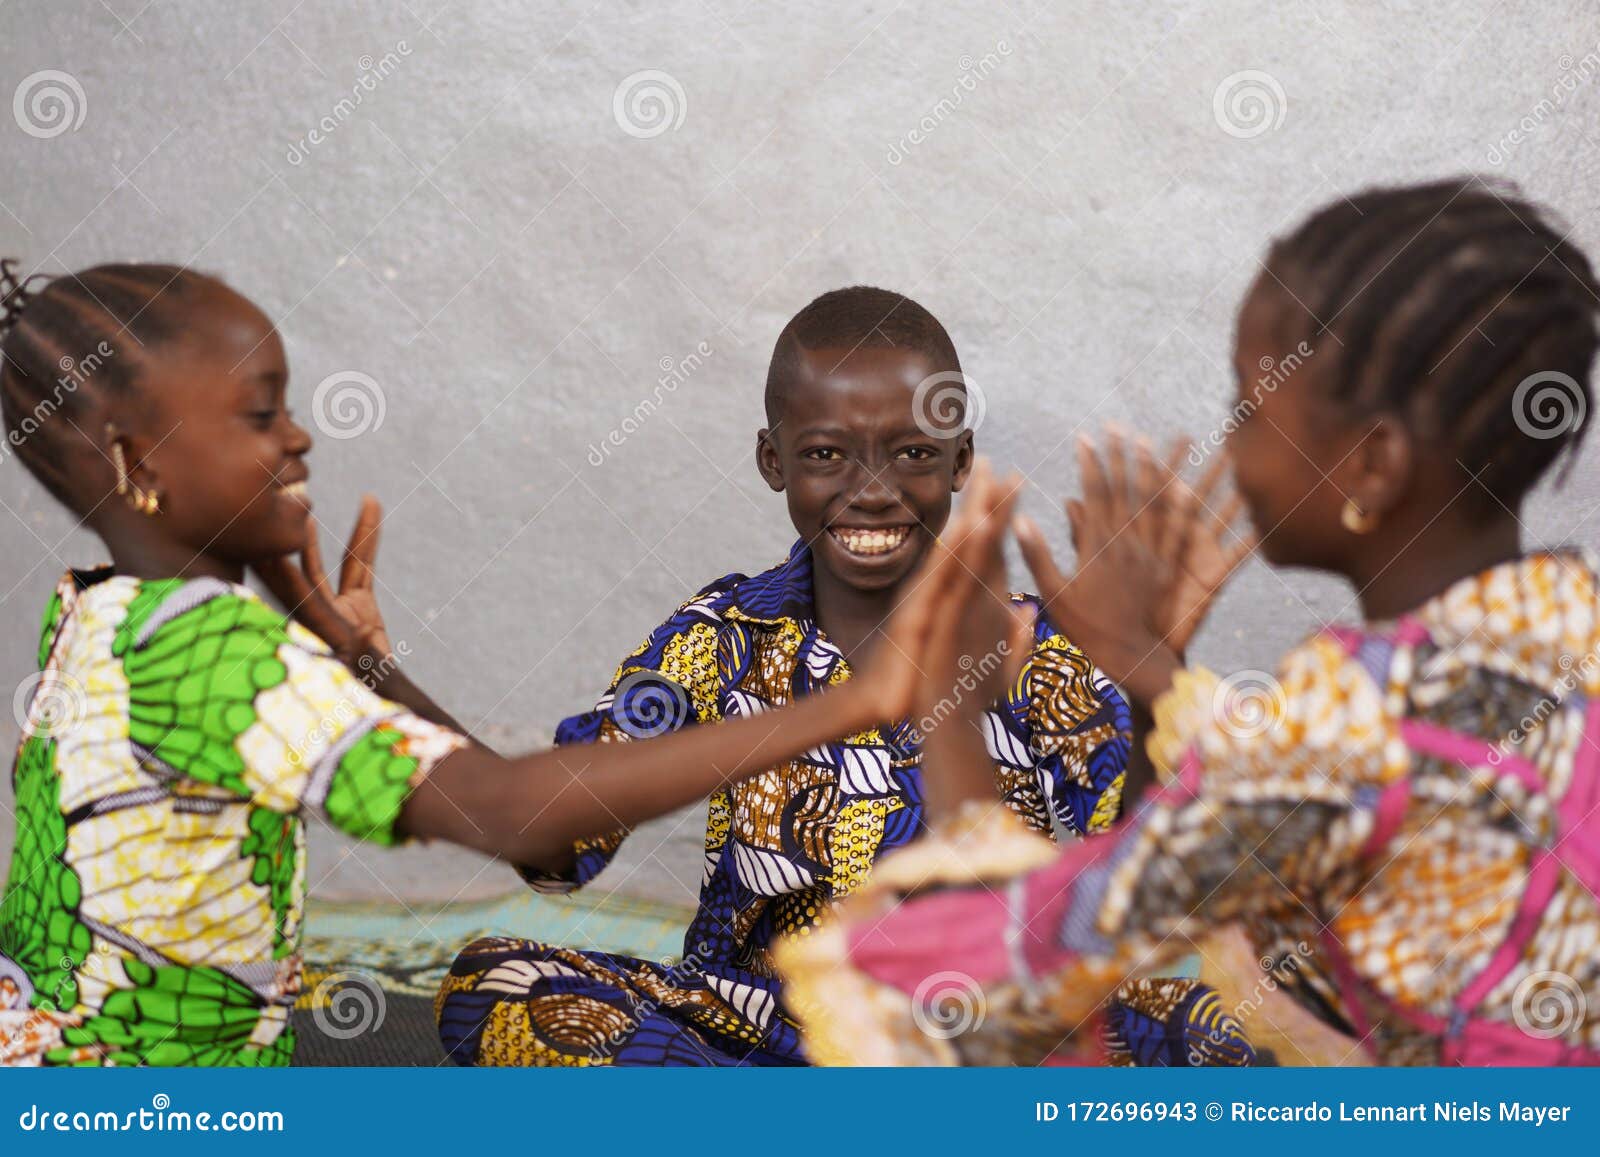 Playtime for African at Home, Fun Playing with Hands Stock Image - Image of play, person: 172696943